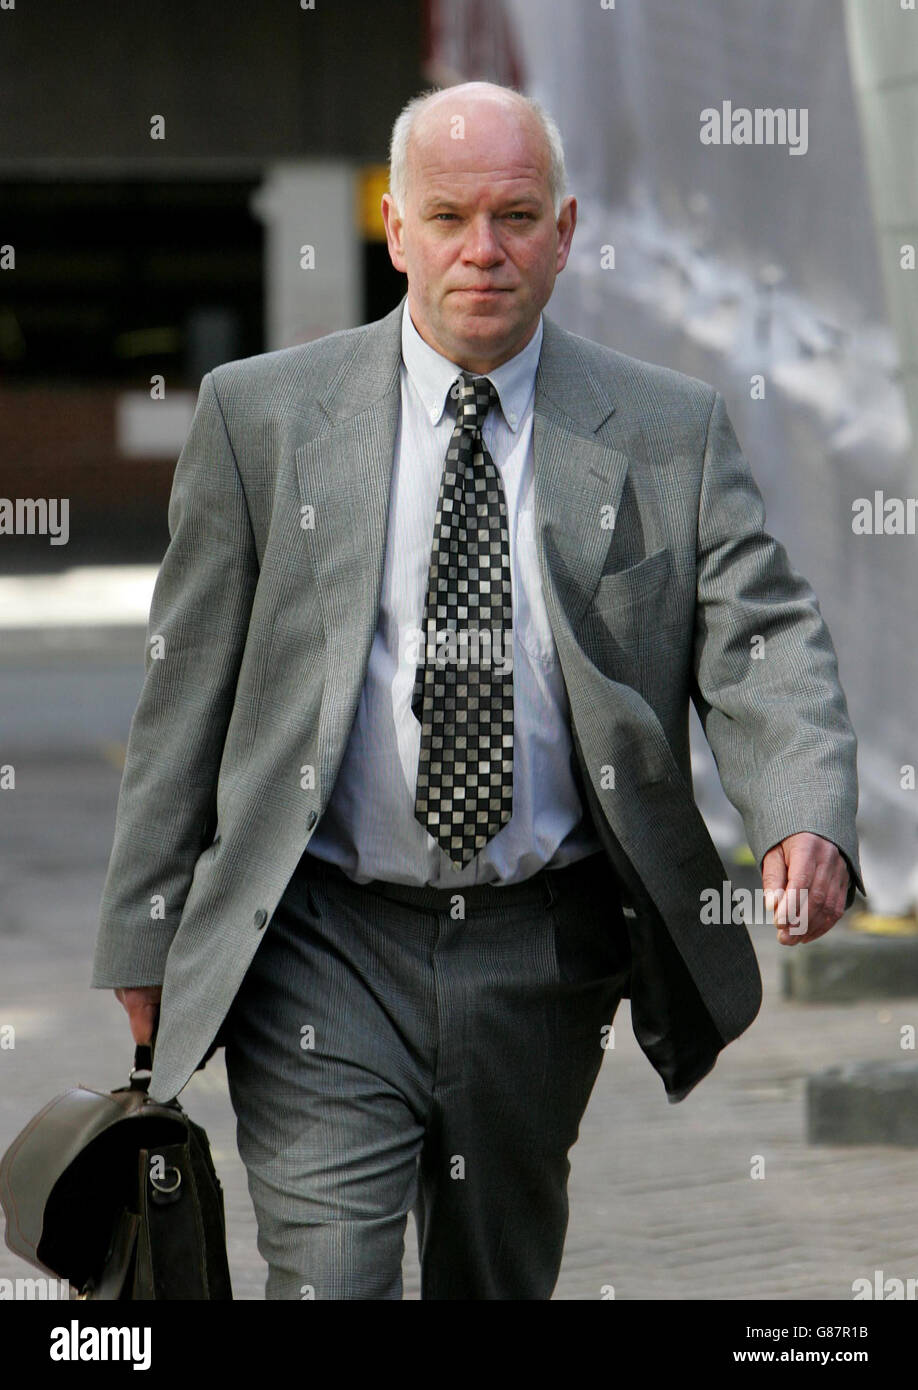 Ian Burke, the Head of Art at Eton College arrives at an employment tribunal hearing where former teacher Sarah Forsyth is appealing against her alleged unfair sacking from the prestigous school. Yesterday, Ms Forsyth claimed in a statement that parts of a painting featured in newspapers as Prince Harry's A-Level work had been completed by Mr Burke. Stock Photo